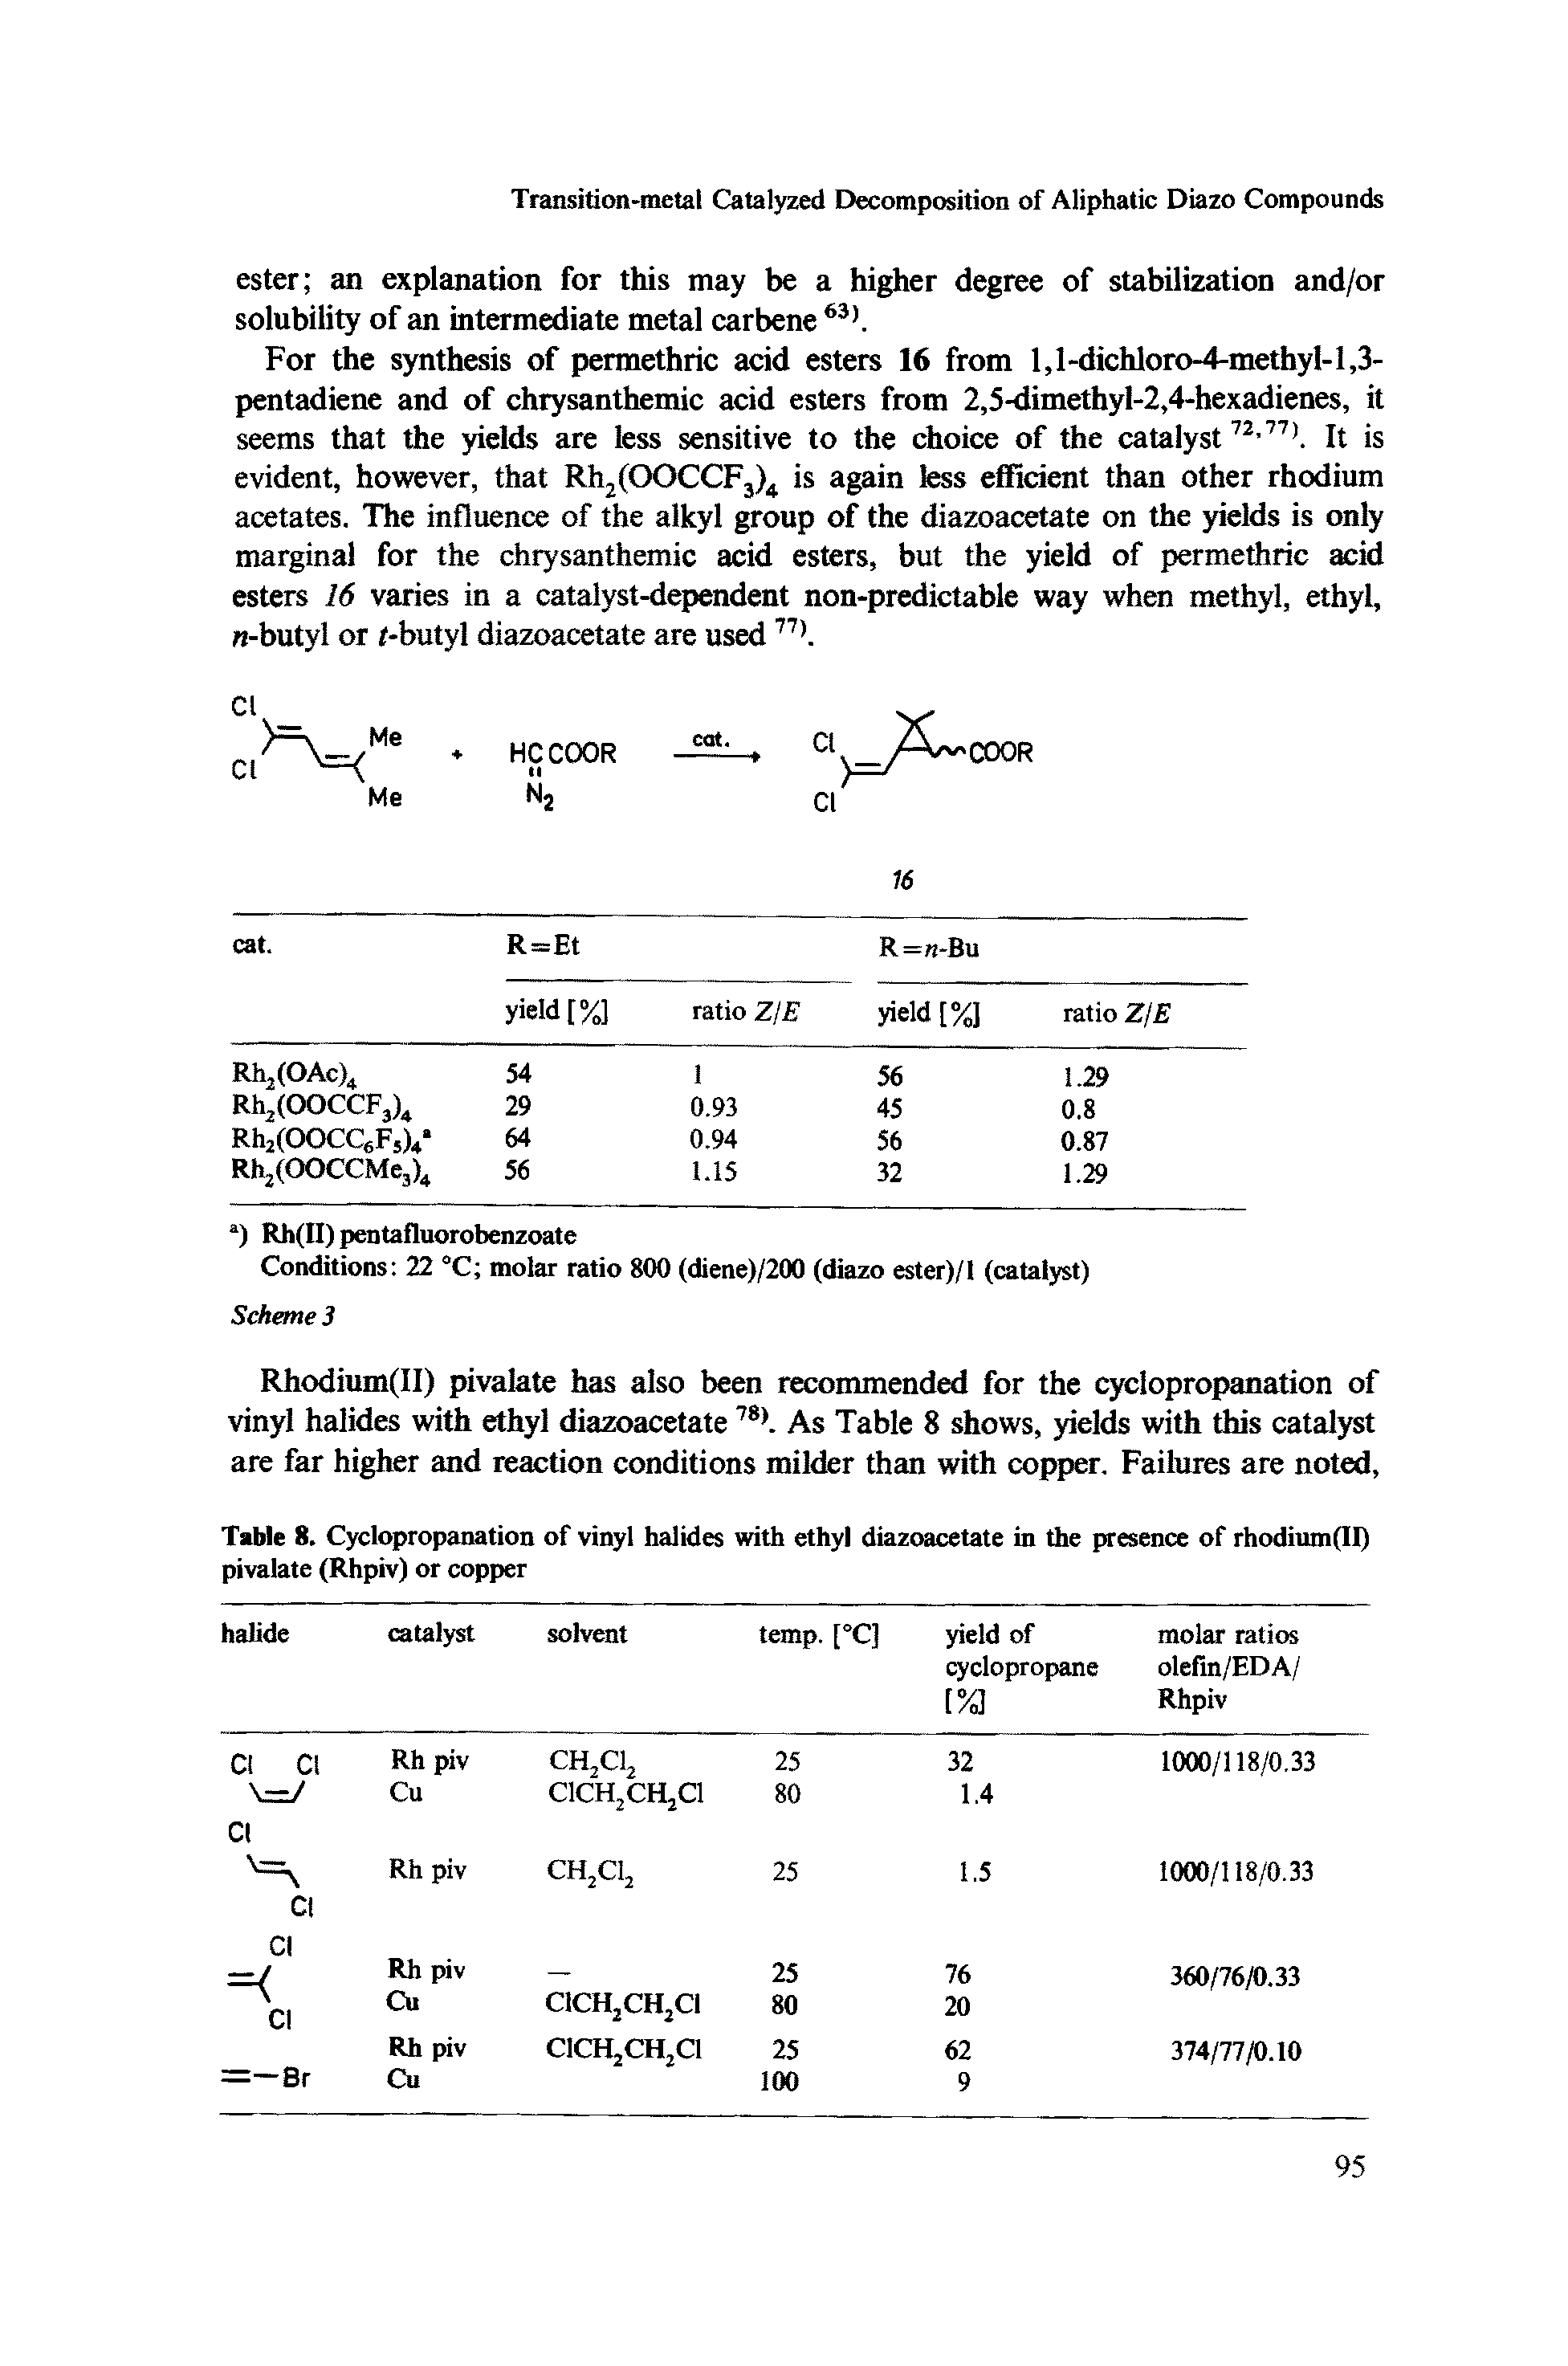 Table 8. Cyclopropanation of vinyl halides with ethyl diazoacetate in the presence of rhodium(Il) pivalate (Rhpiv) or copper...